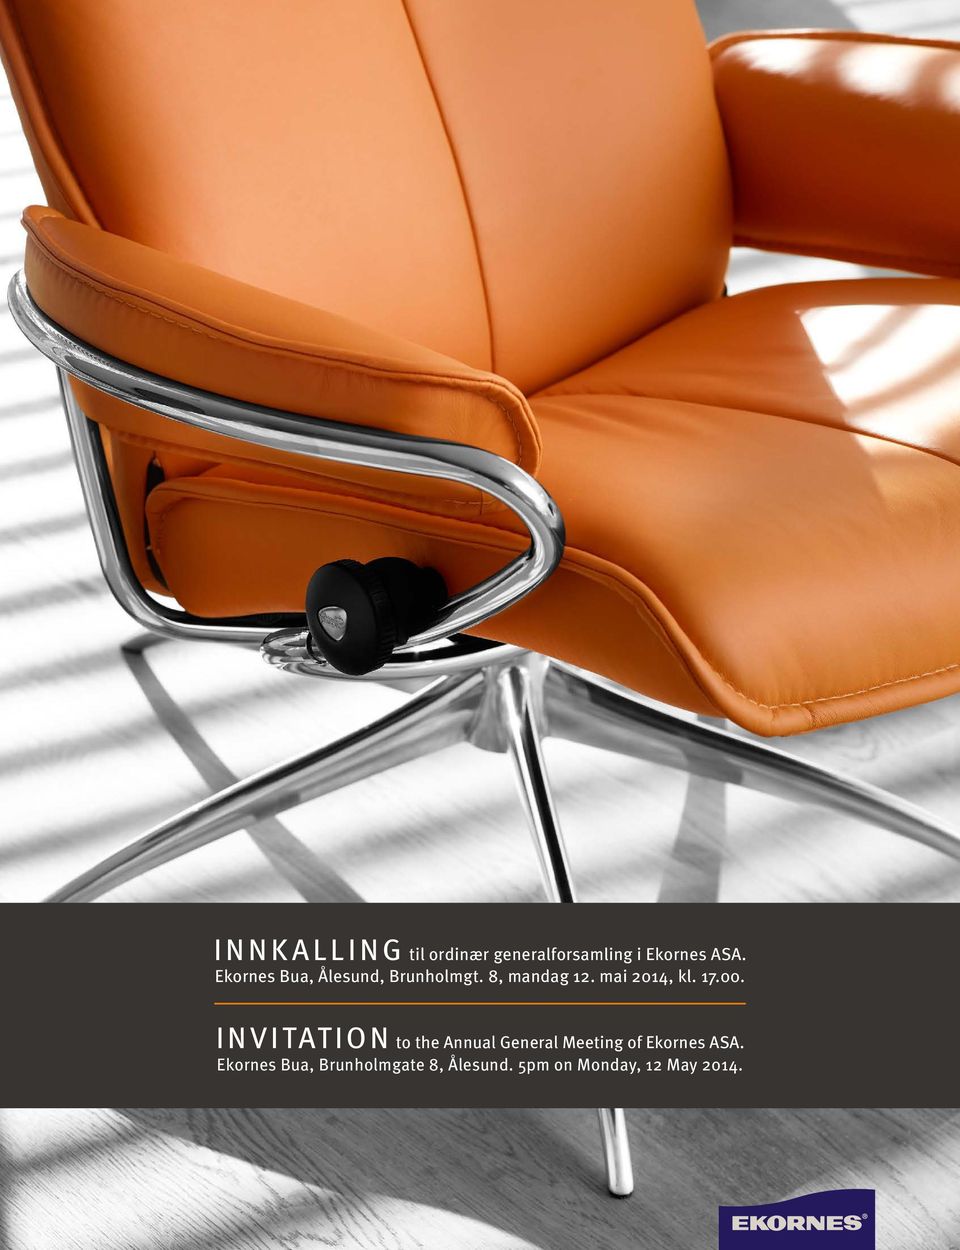 17.00. Invitation to the Annual General Meeting of Ekornes ASA.